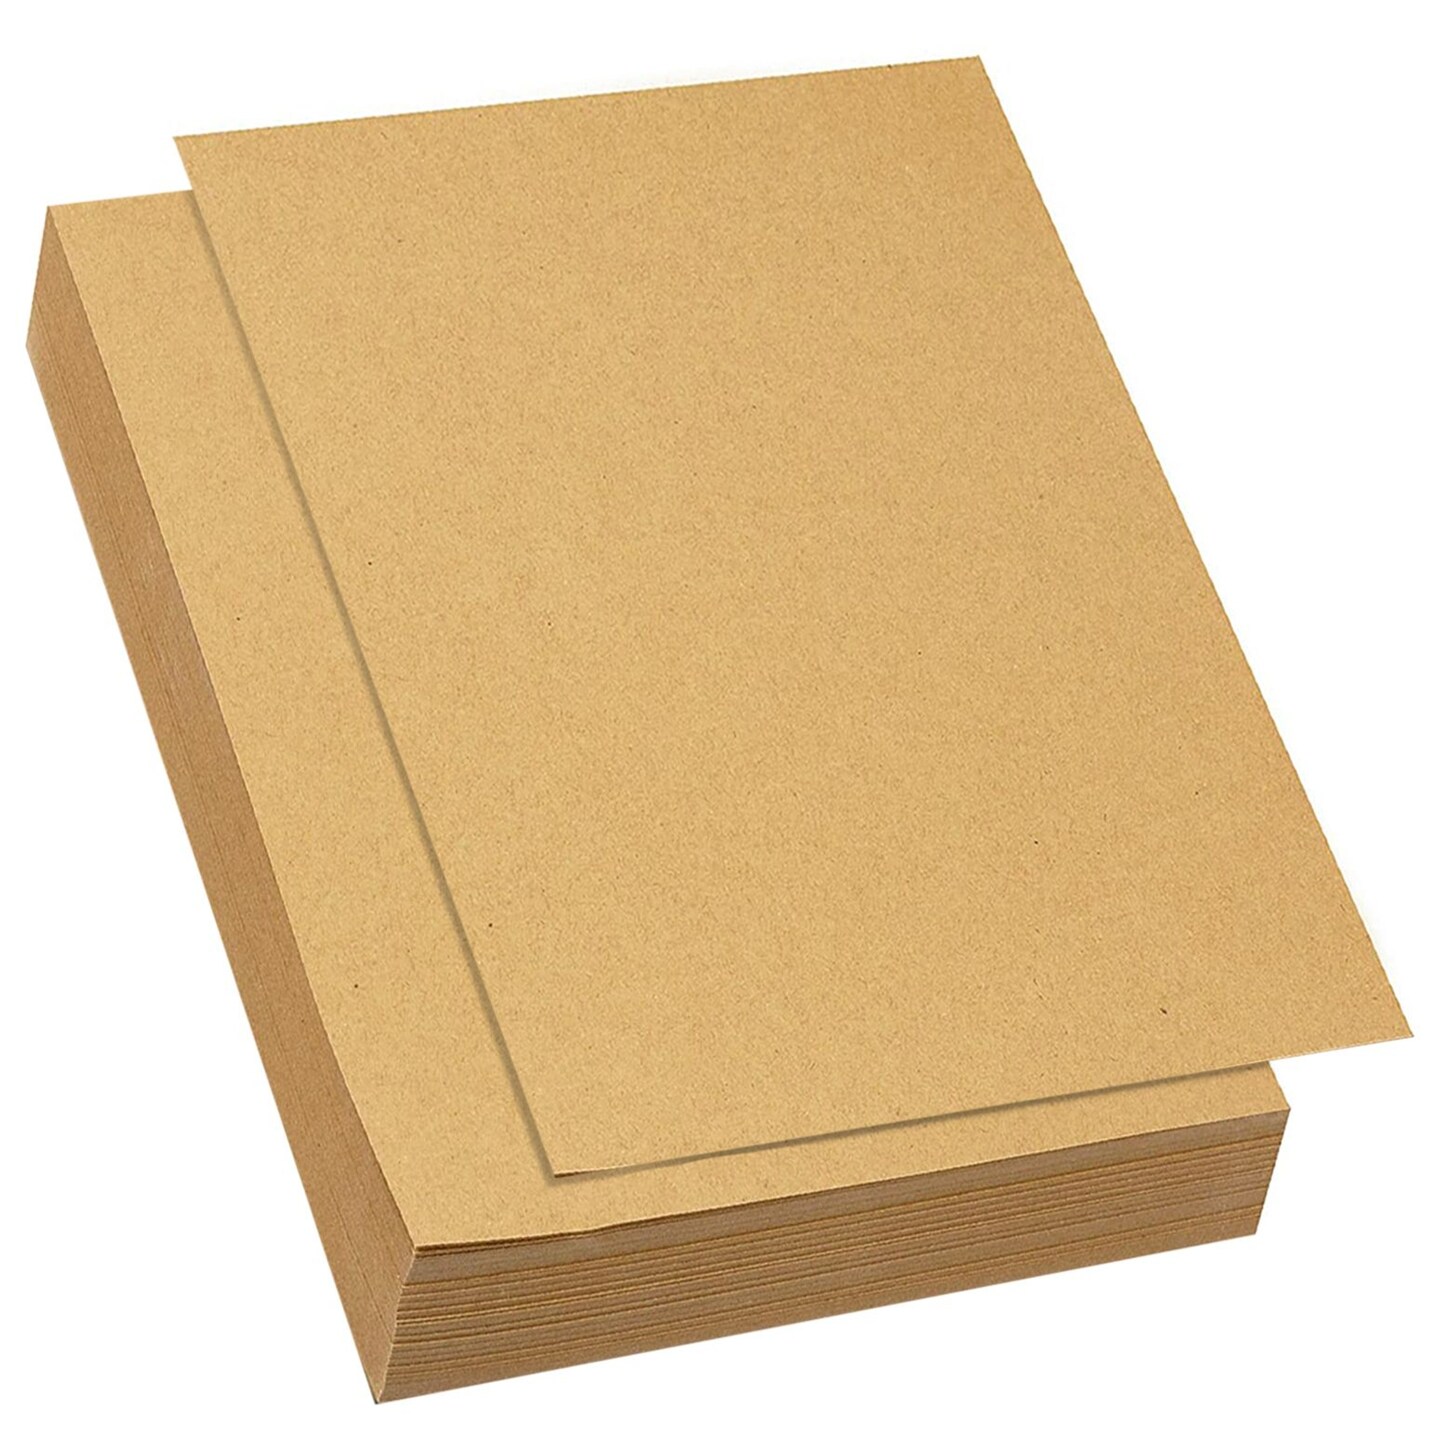 200-pack-brown-craft-paper-for-diy-projects-classroom-letter-size